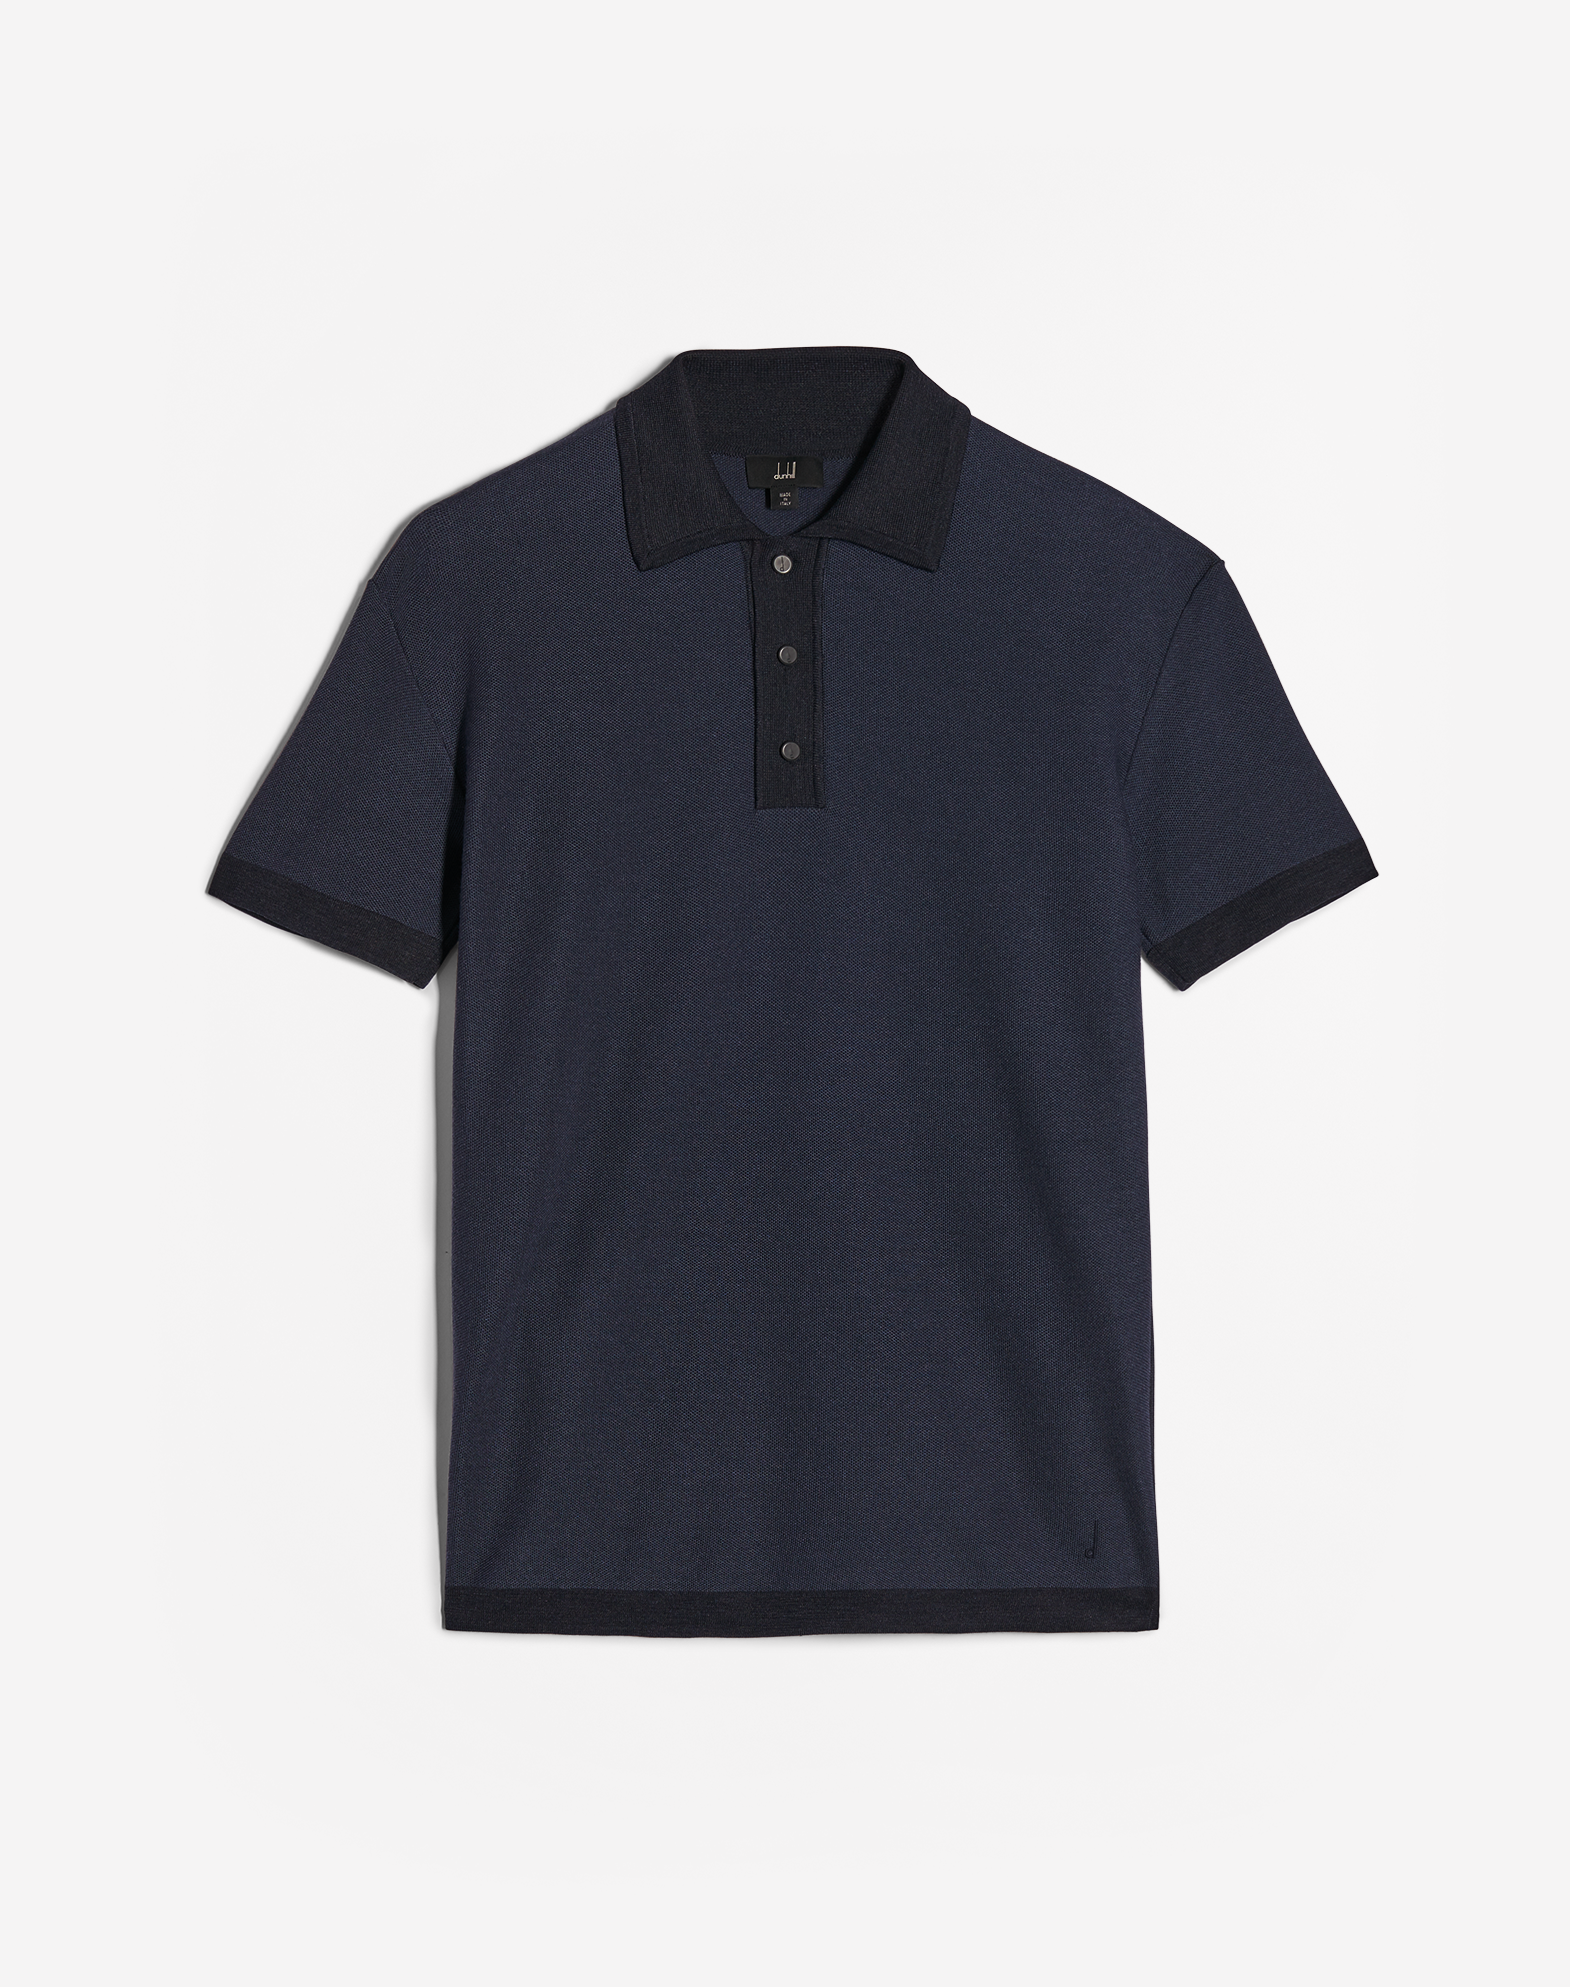 Dunhill Men's Knitted Polos